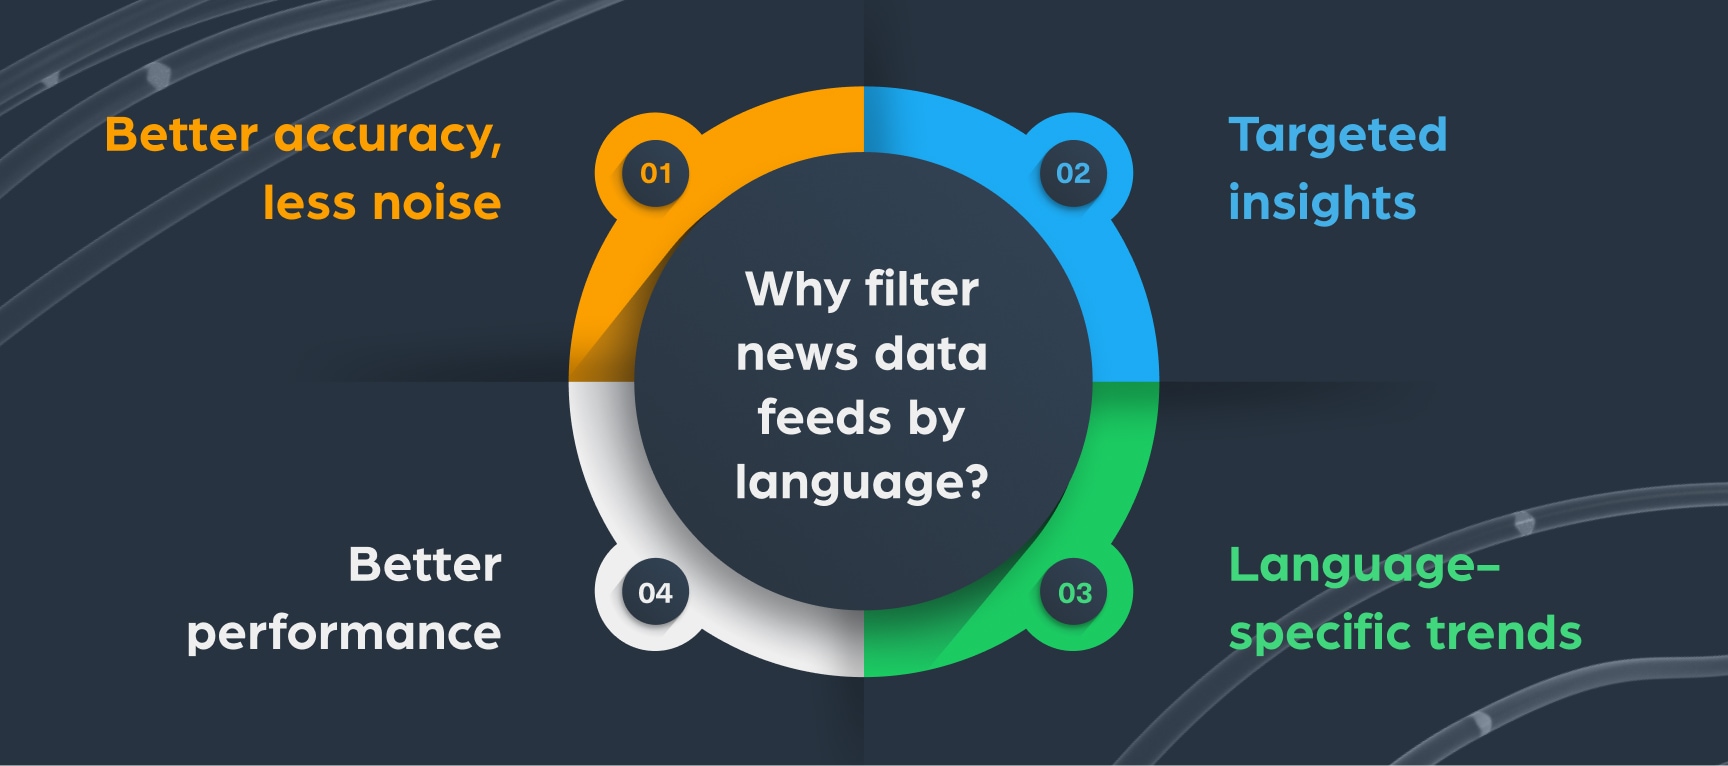 Why filter news data feeds by language?